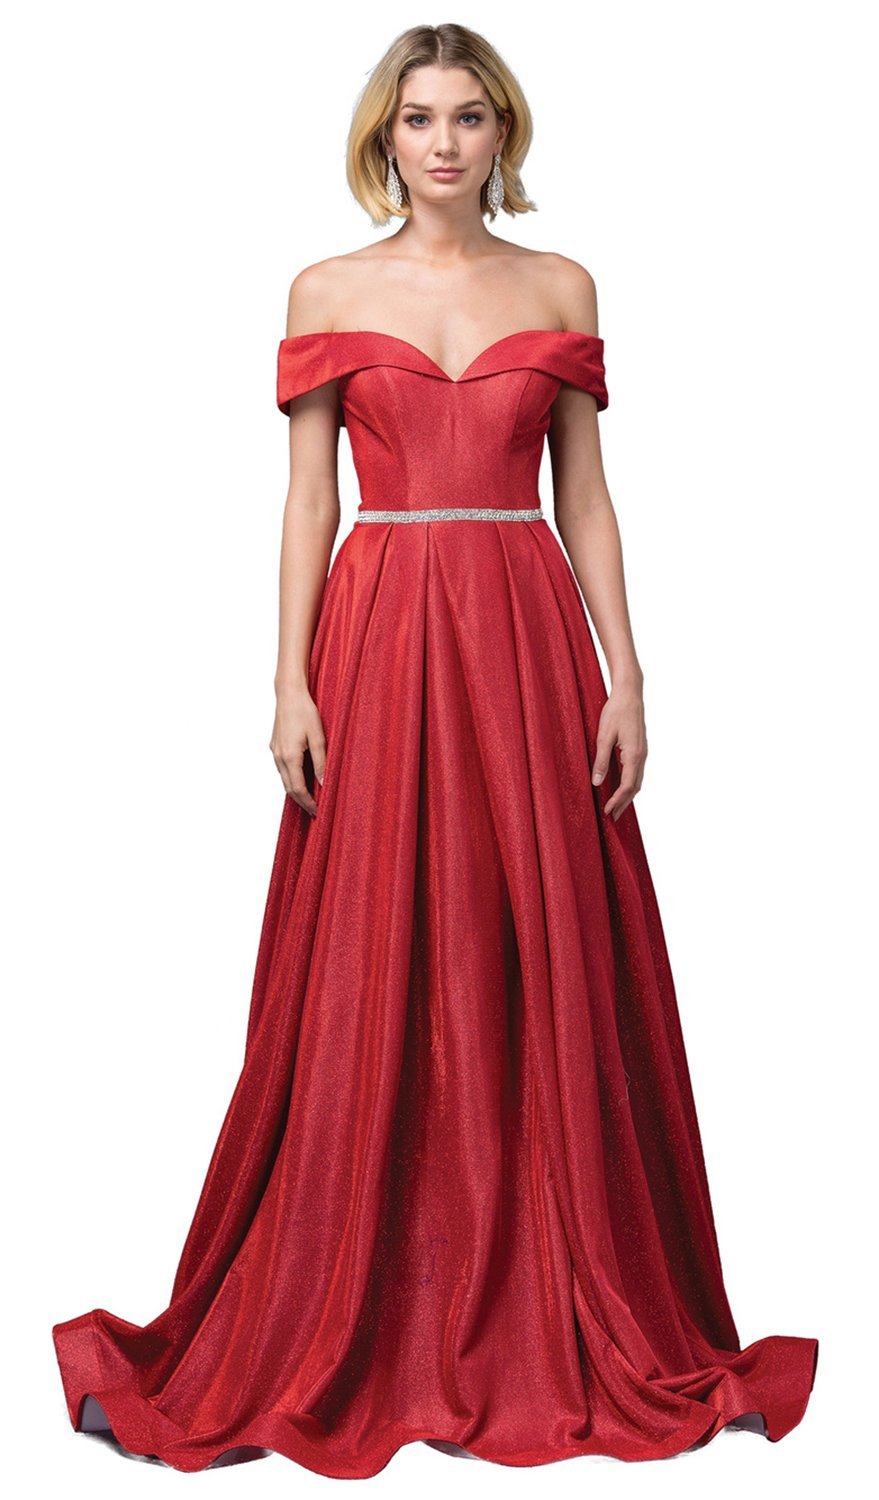 Dancing Queen - 2824 Iridescent Off Shoulder Gown with High Slit In Red